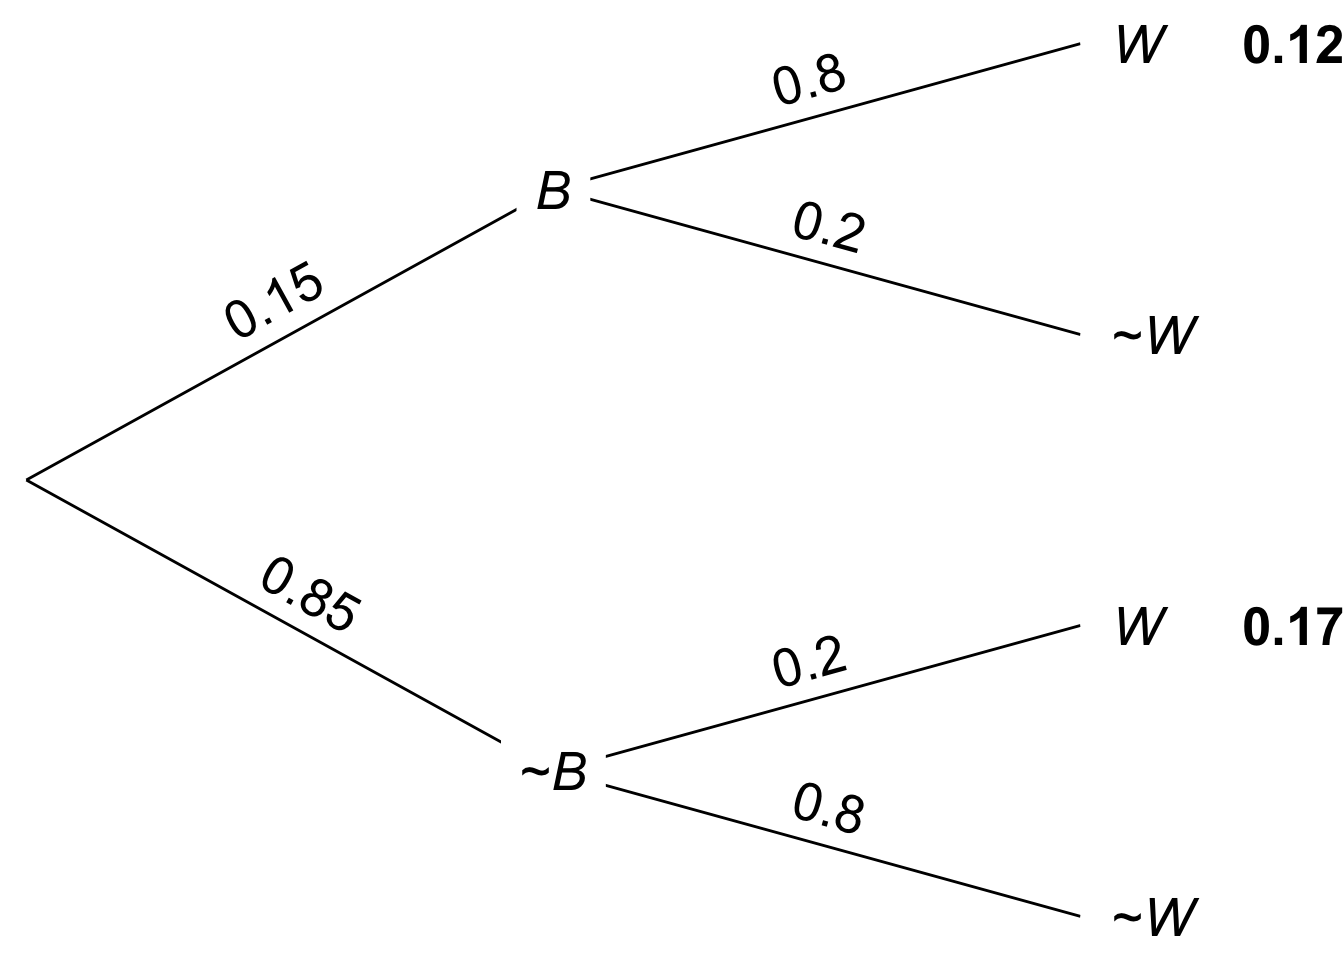 A tree diagram for the taxicab problem. We calculate $\p(B \wedge W) = .12$ and $\p(W) = .12 + .17$, then use the definition of conditional probability to get $\p(B \given W) = 12/29$.